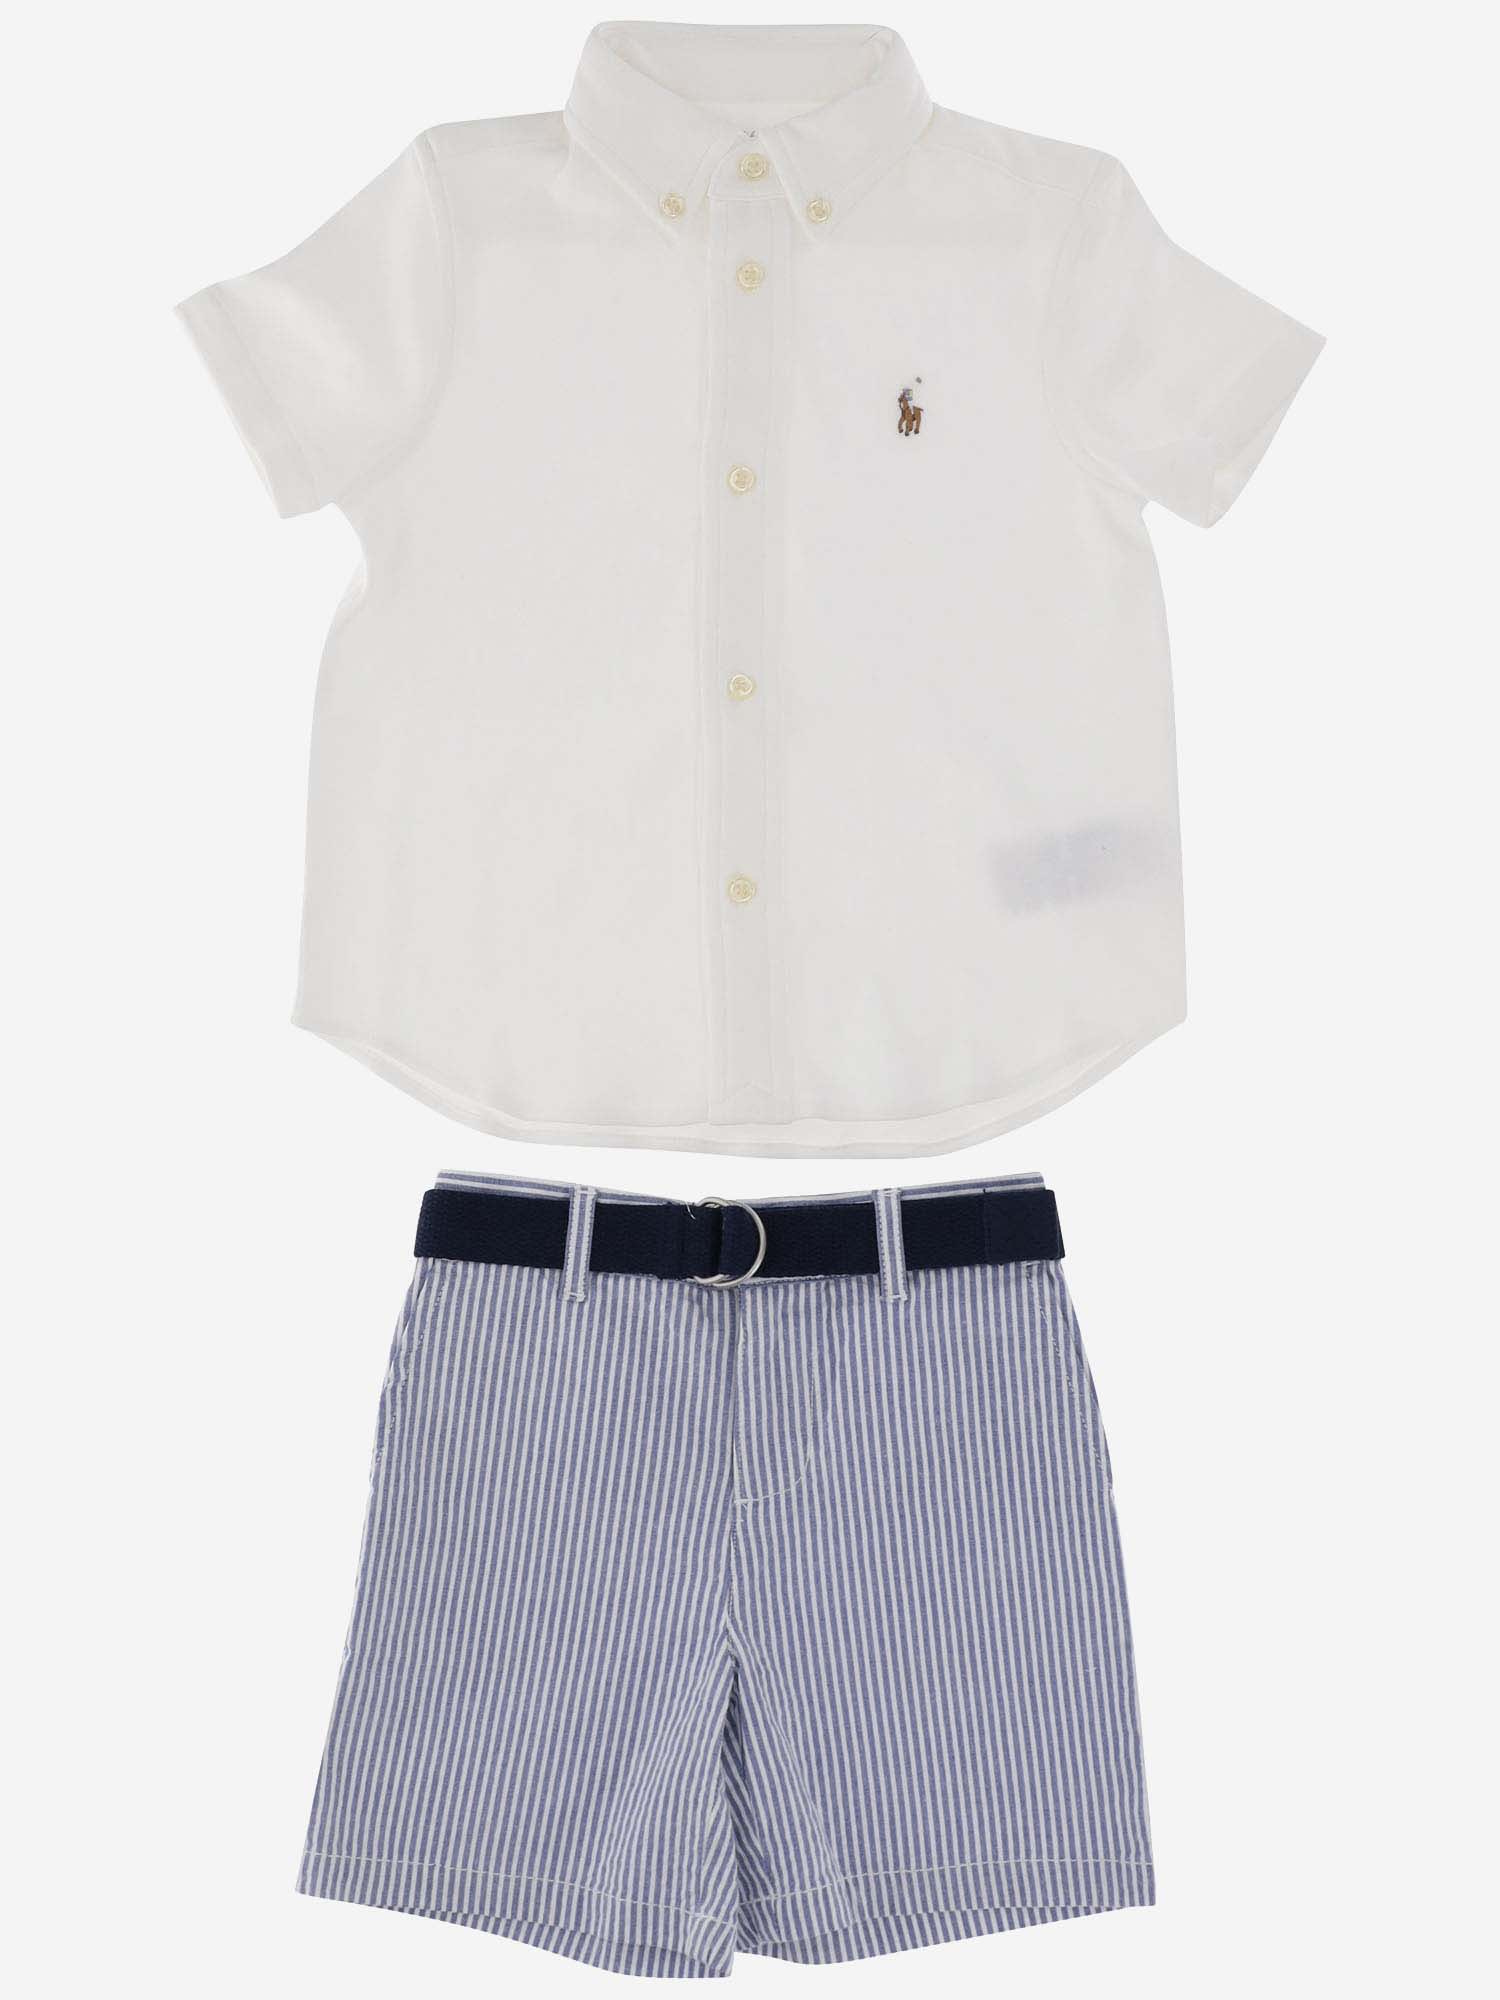 Ralph Lauren Babies' Two-piece Outfit Set In White